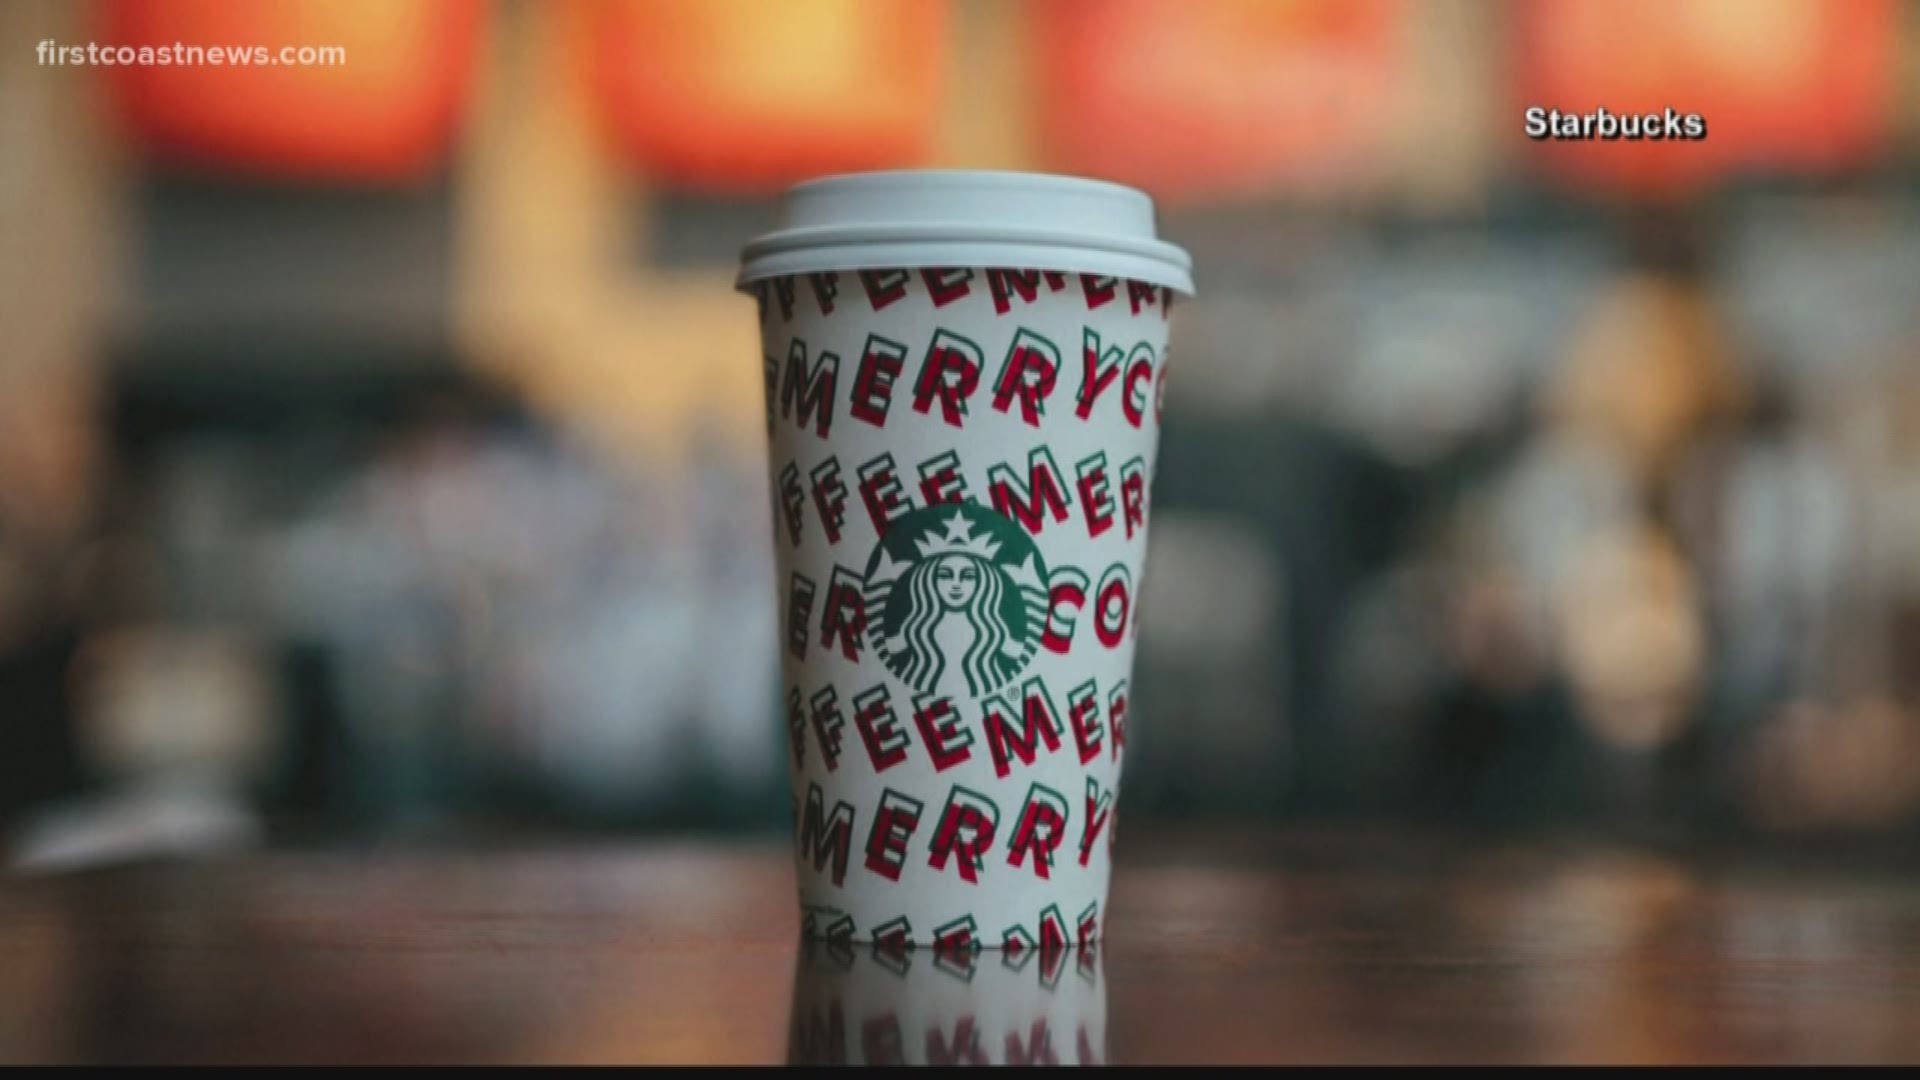 Holidays have you drained? Don't worry, Starbucks is set to host surprise pop-up parties throughout to give out free coffee.